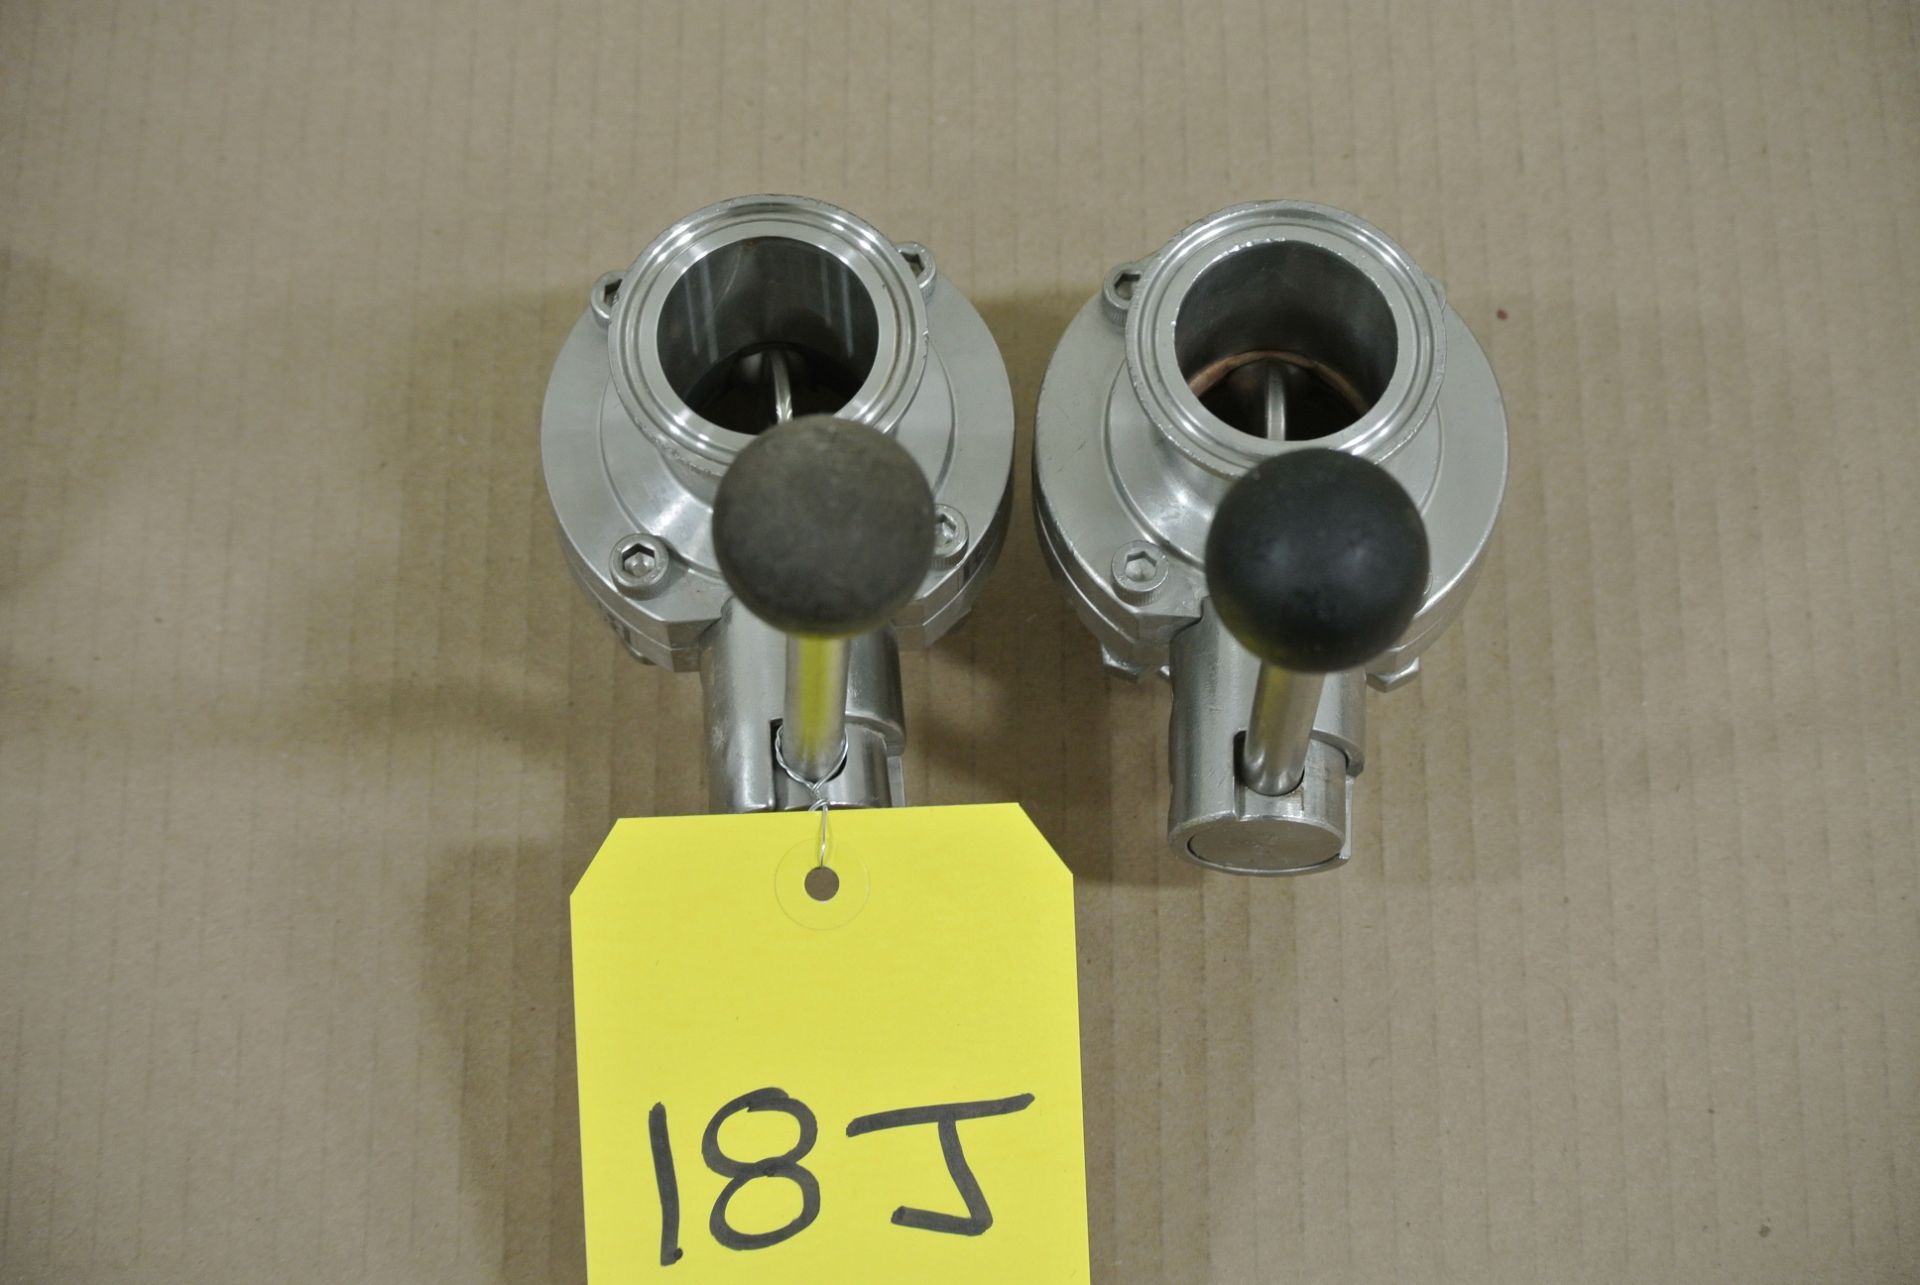 1 1/2" S/S Butterfly Valves Rigging Fee $ 15